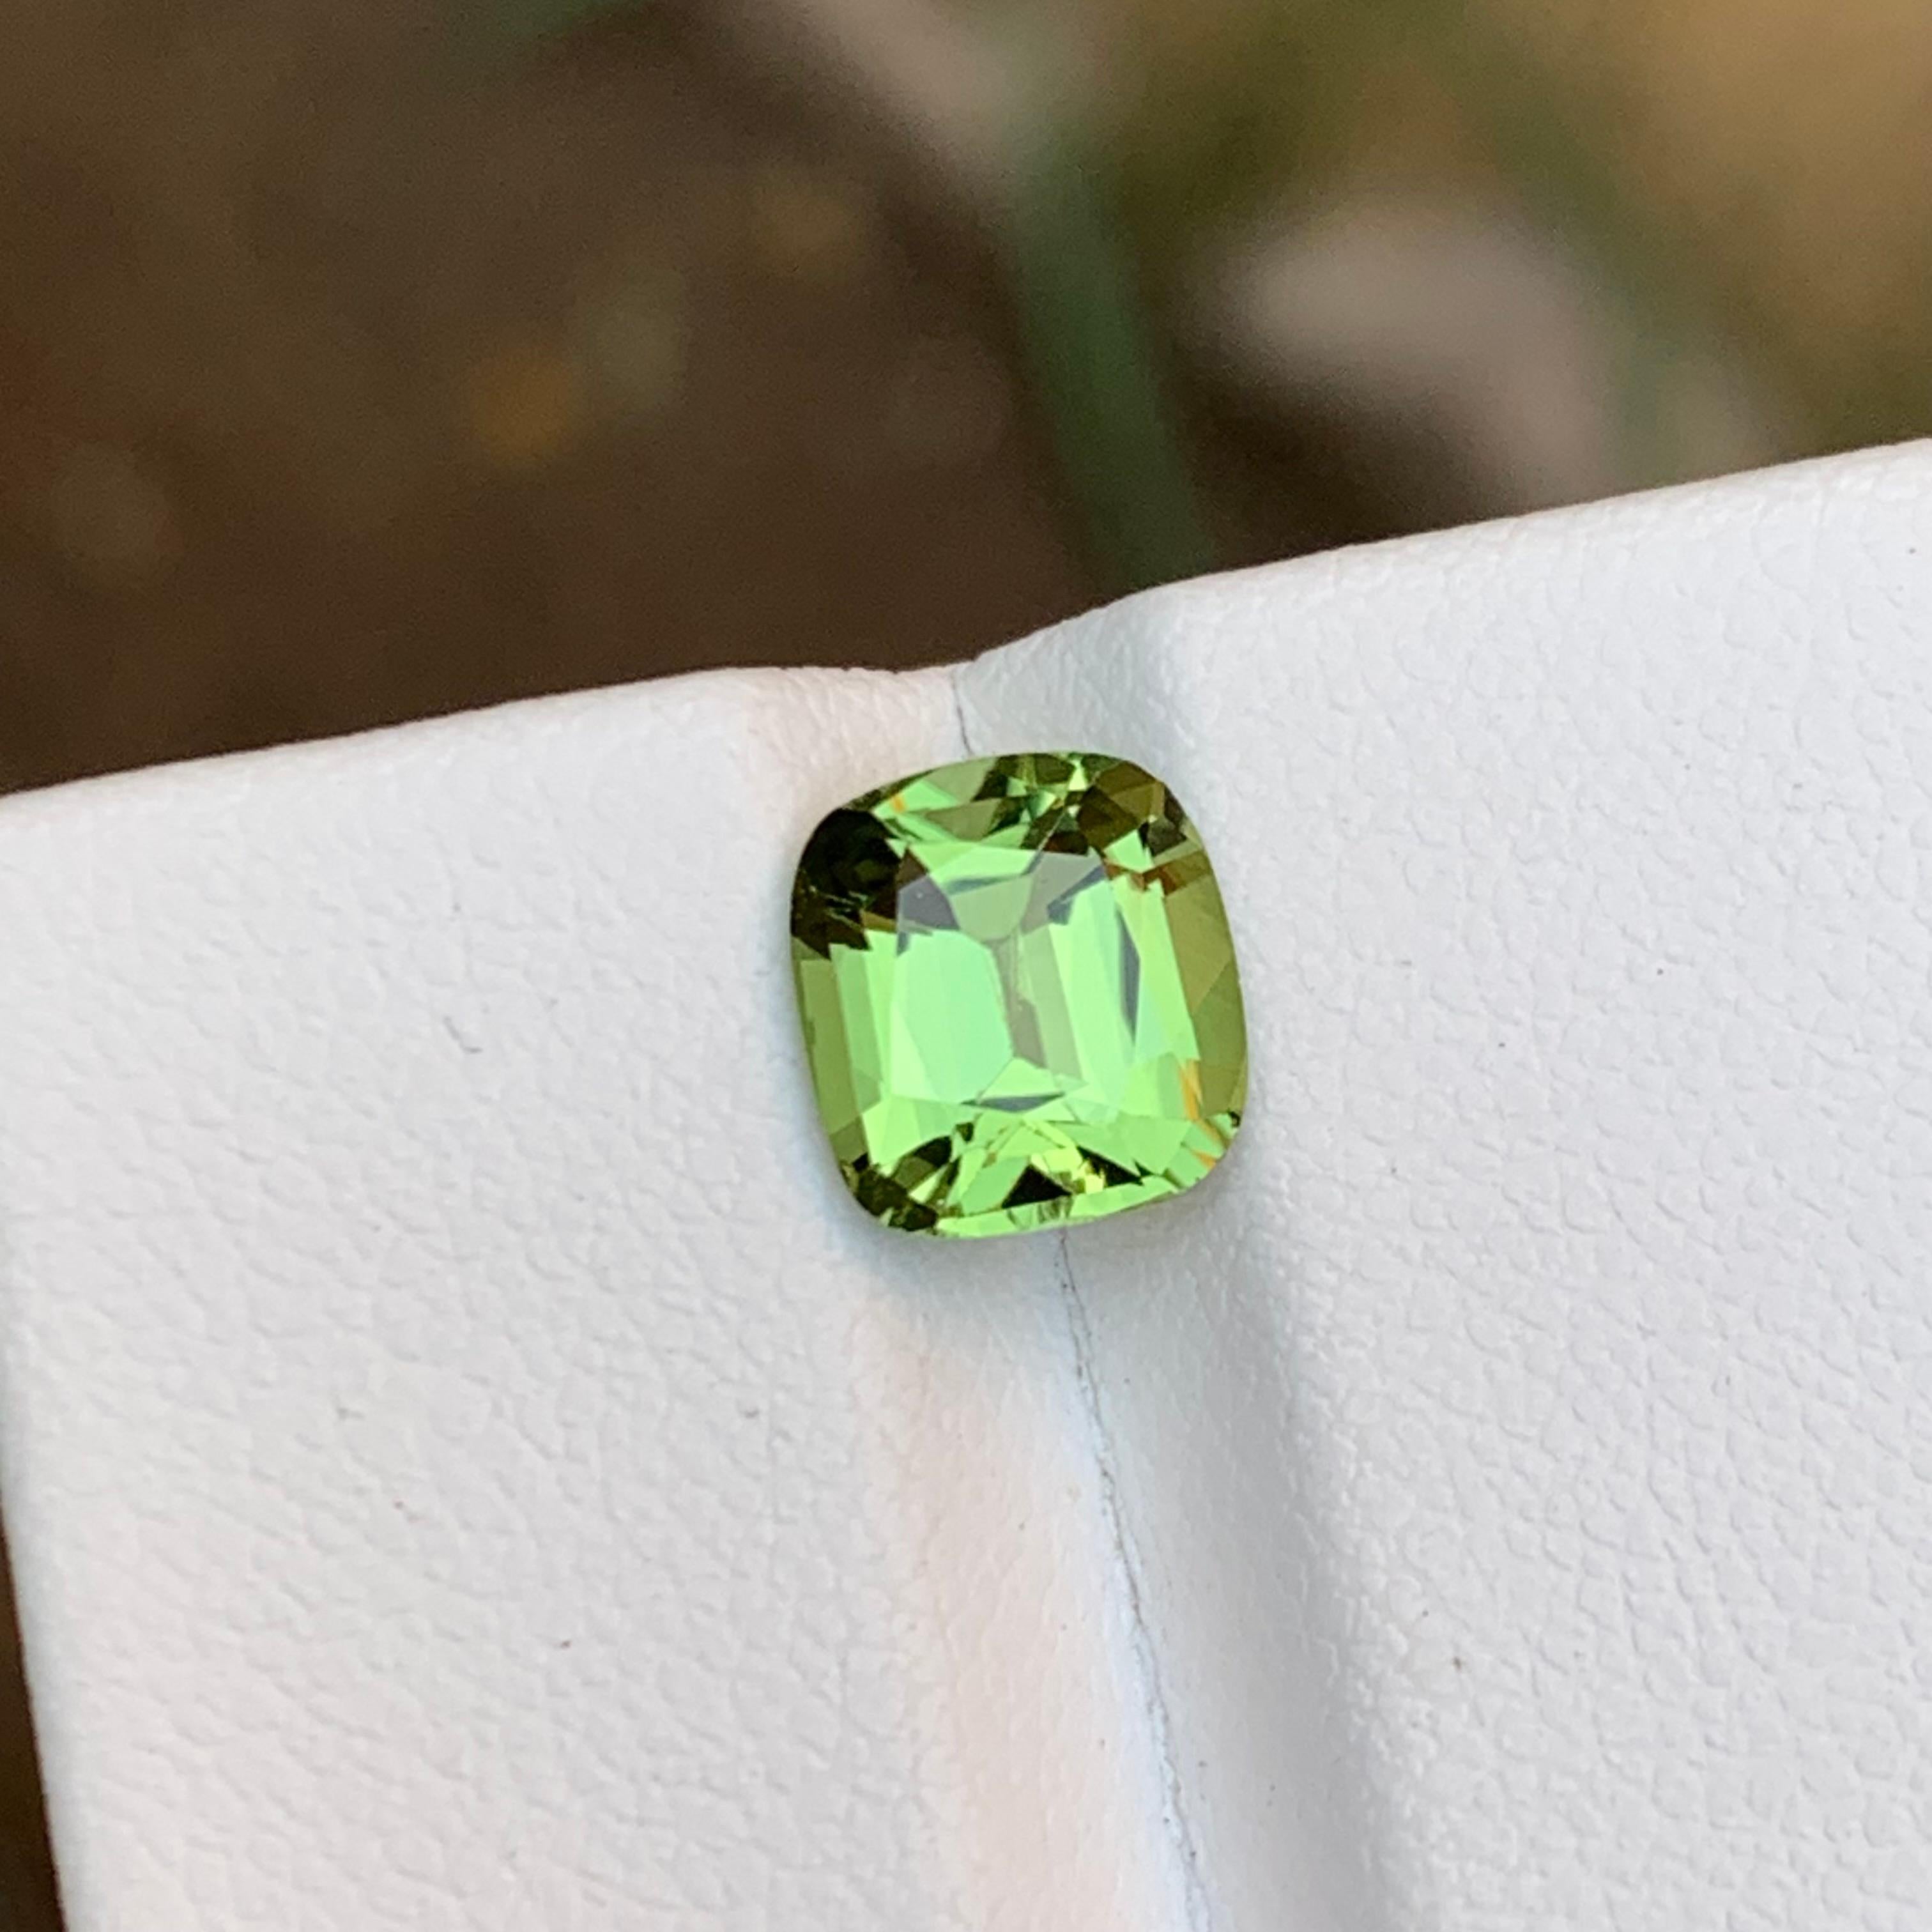 Rare Apple Green Natural Tourmaline Gemstone 1.90 Ct Square Cushion Cut for Ring For Sale 2